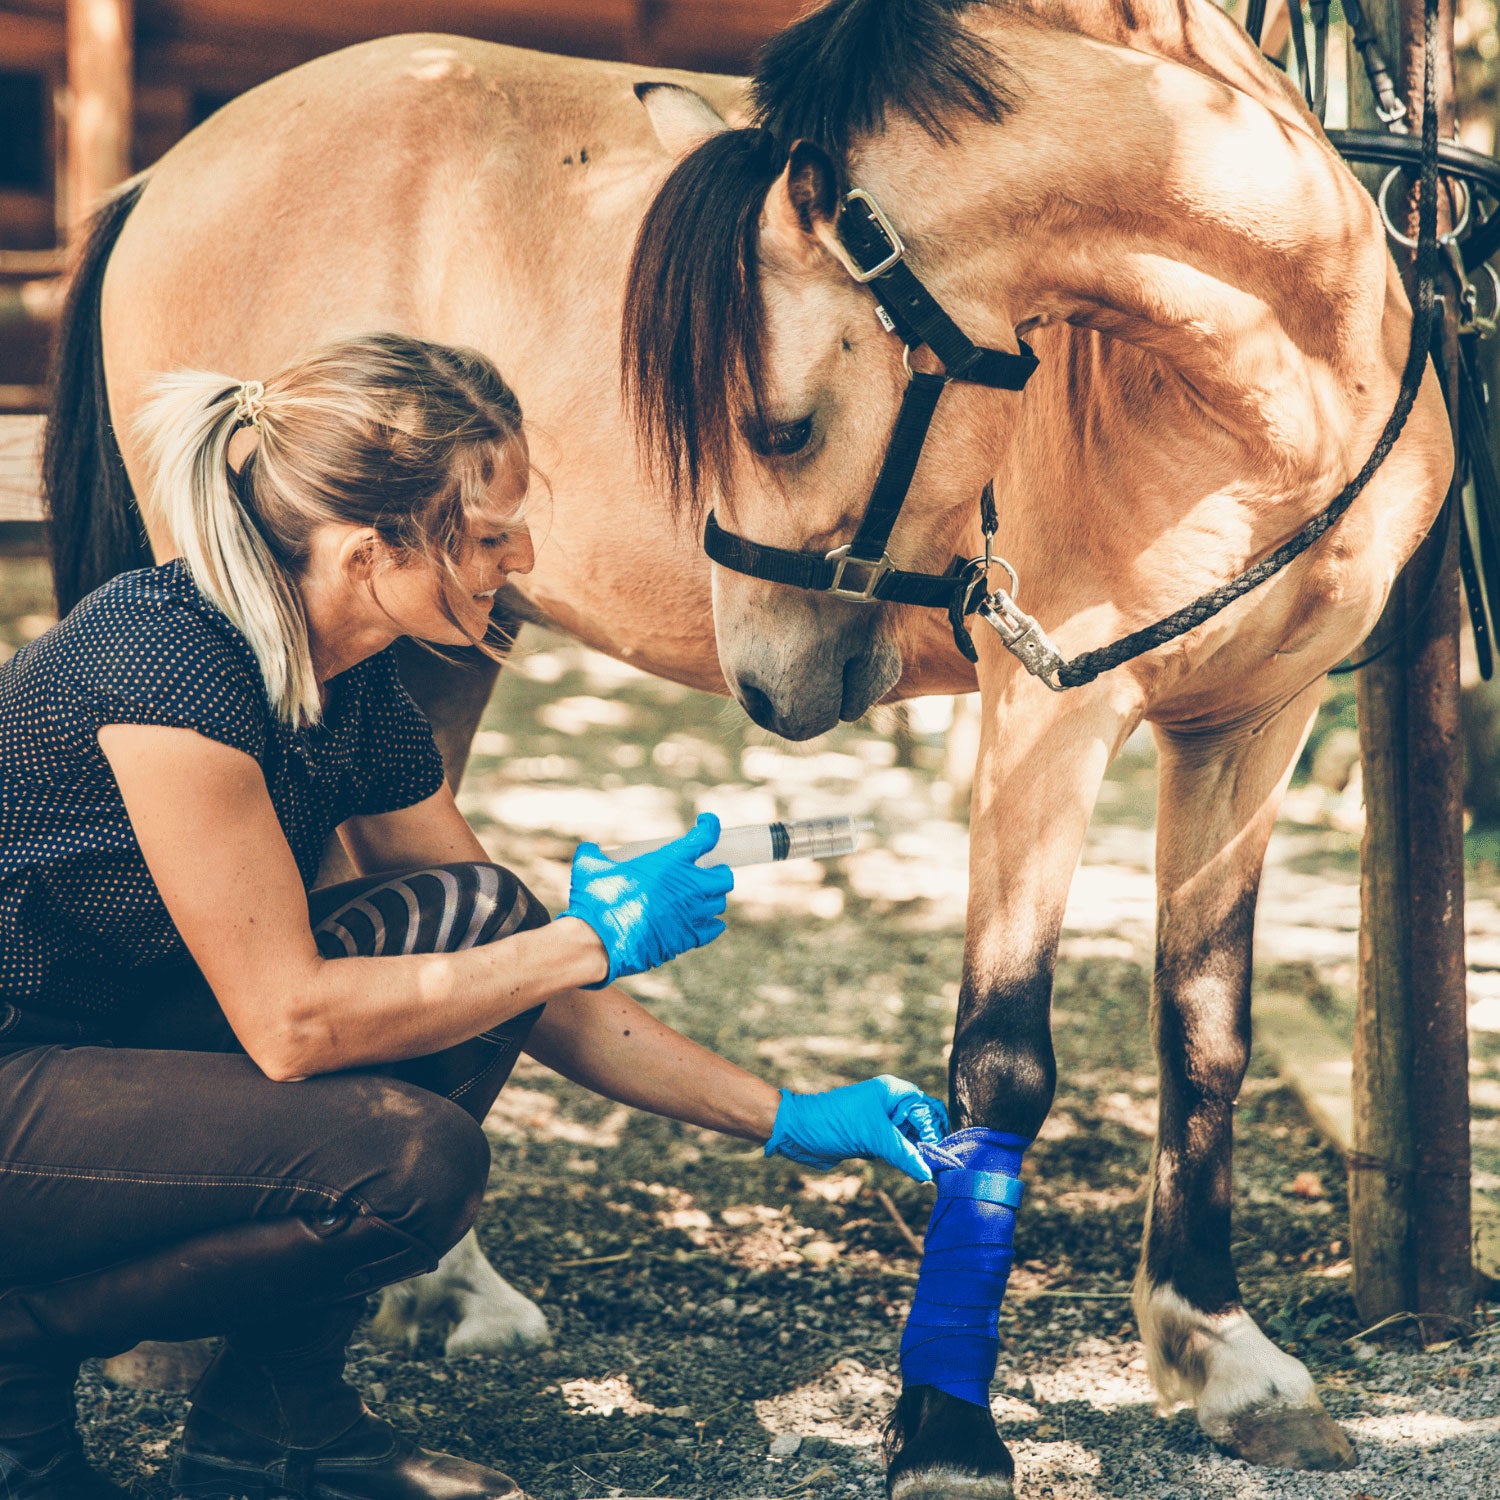 Horse being cared for by person